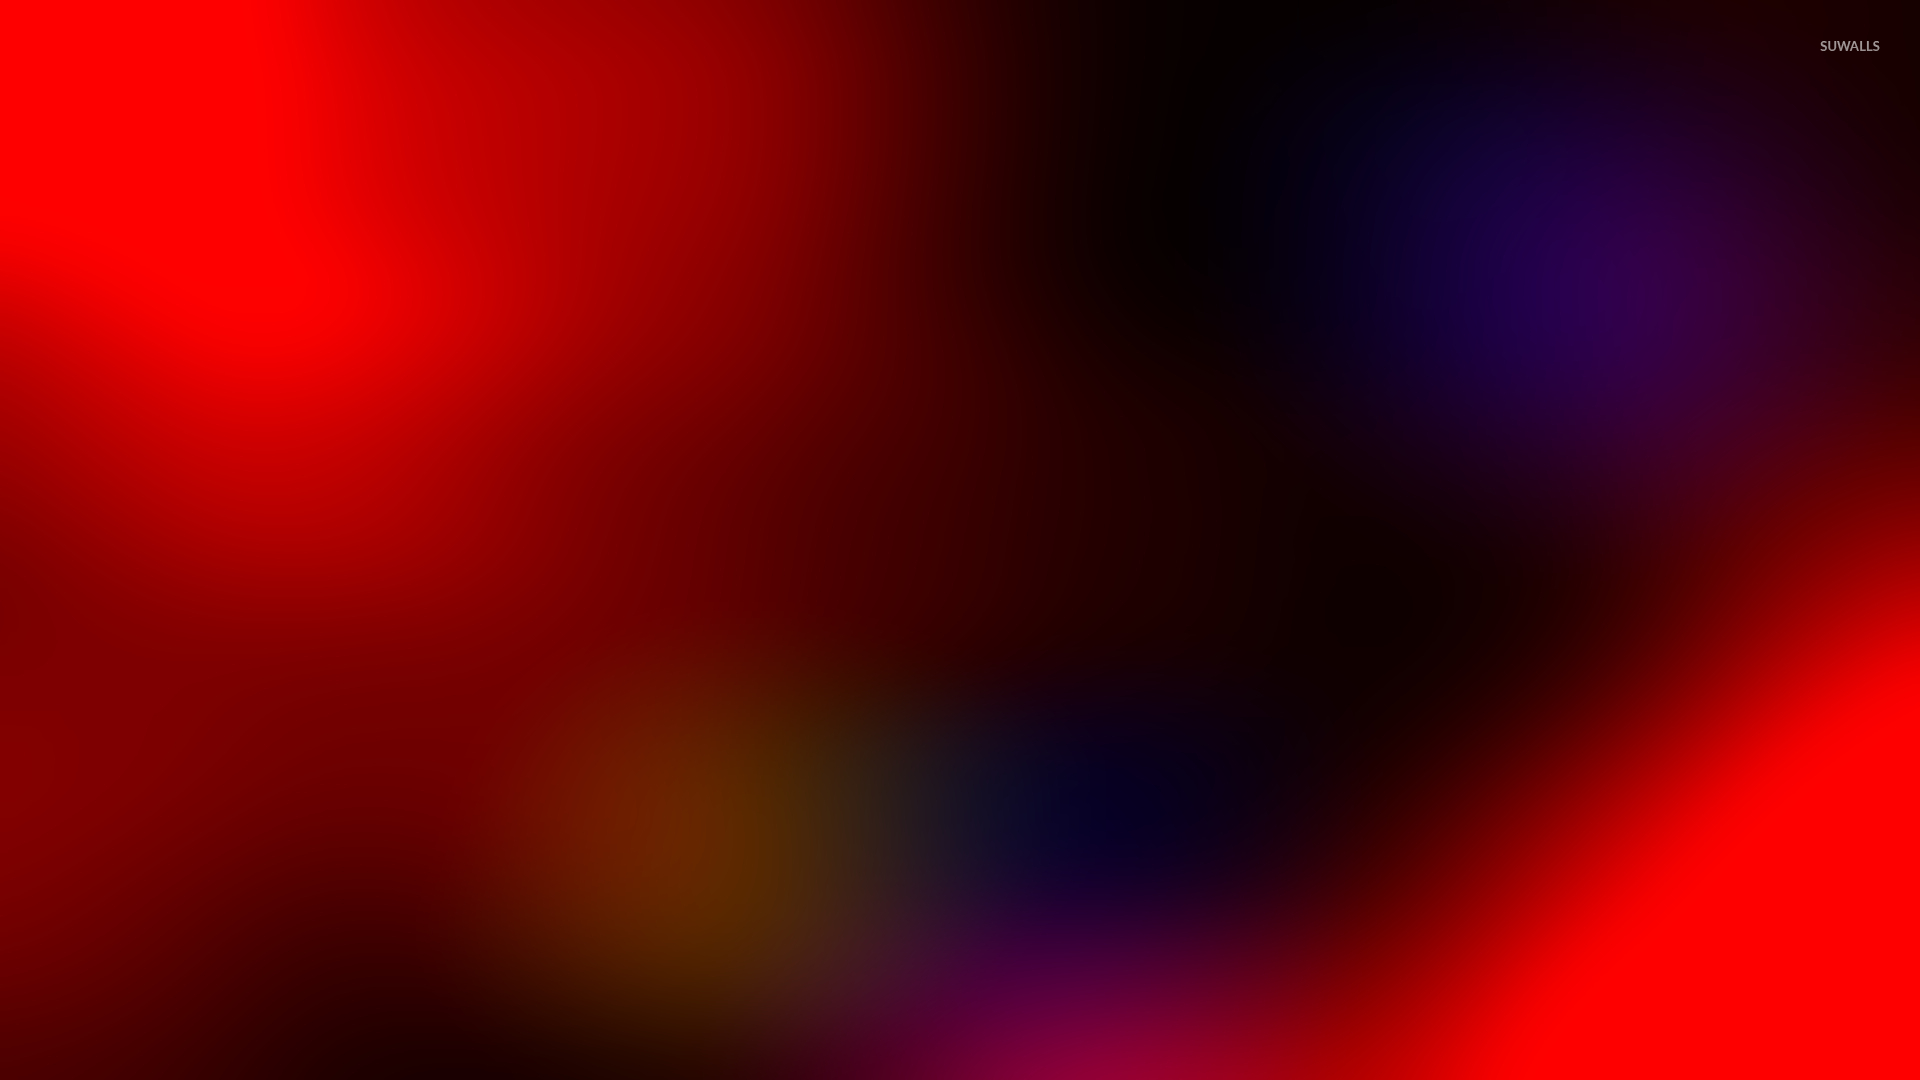 Red blur wallpaper - Abstract wallpapers - #26954